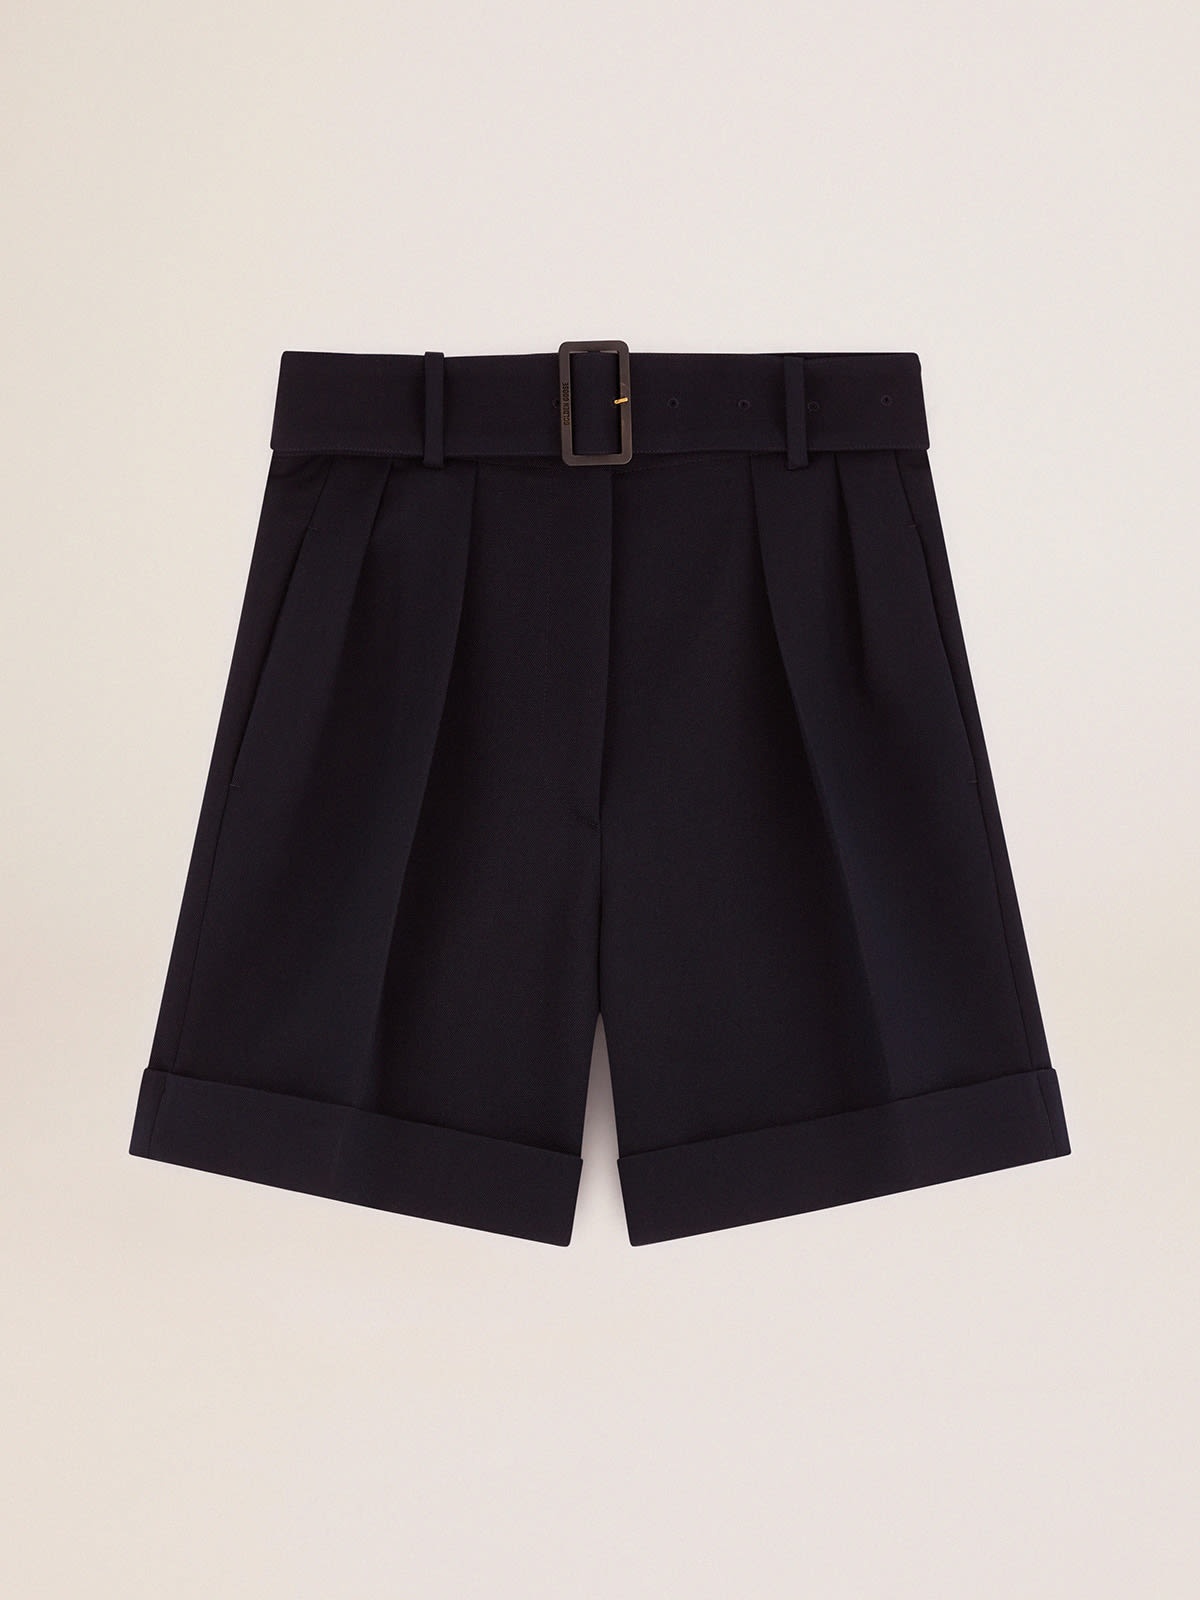 Golden Collection shorts in black wool gabardine with belt at the waist - 1